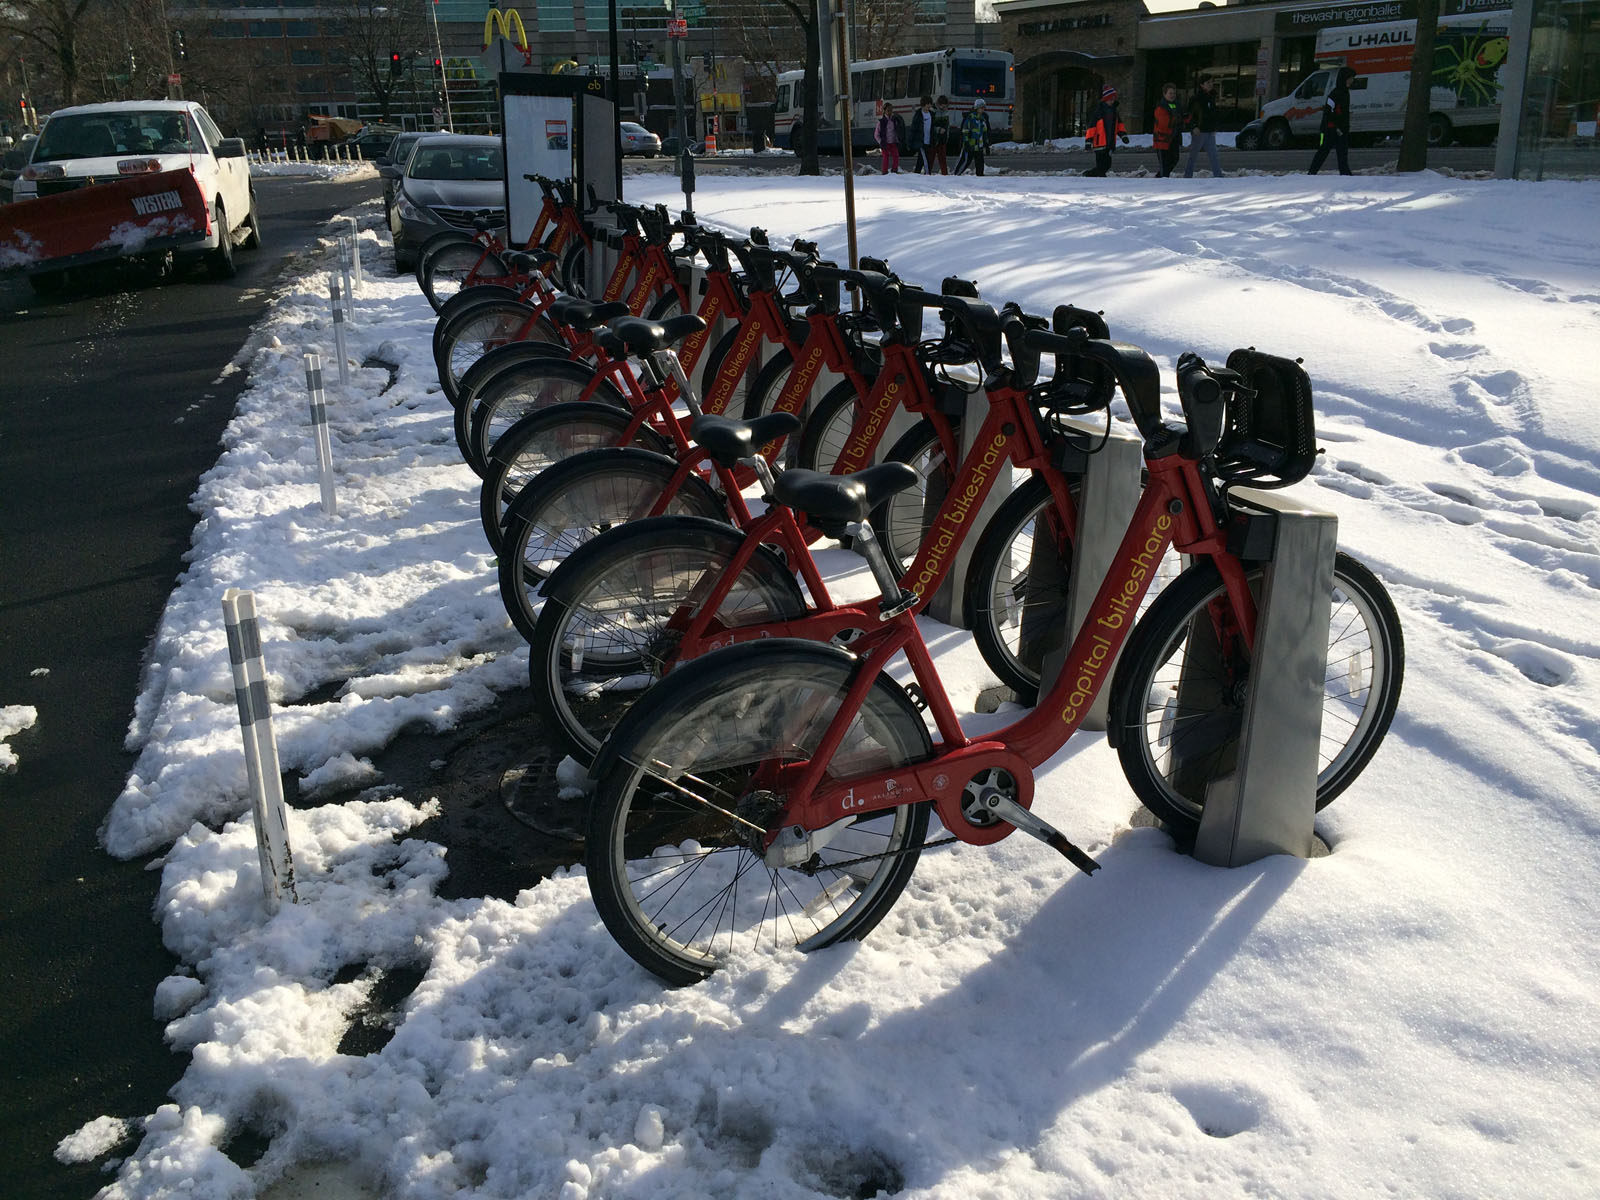 Tips for safe winter bicycling